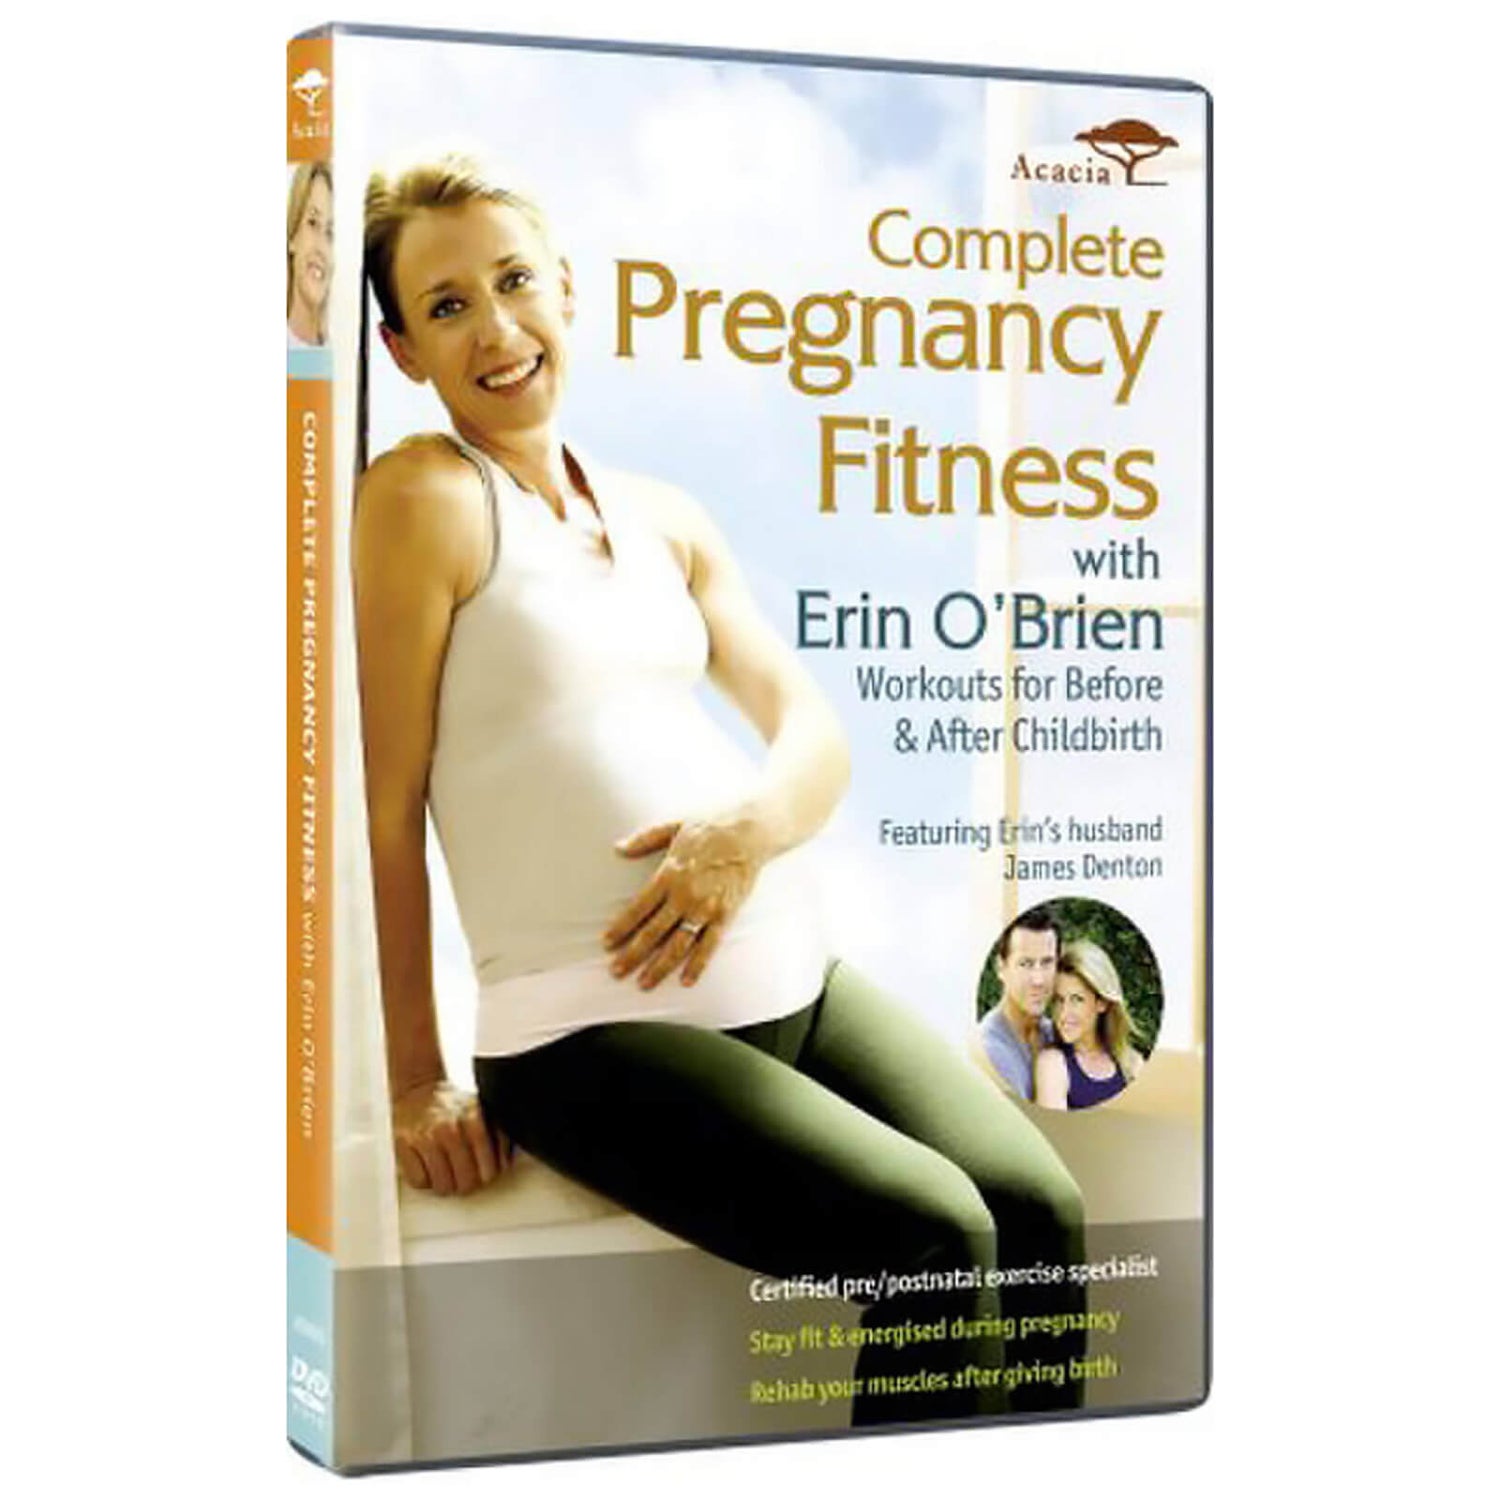 Complete Pregnancy Fitness - With Erin O'Brien